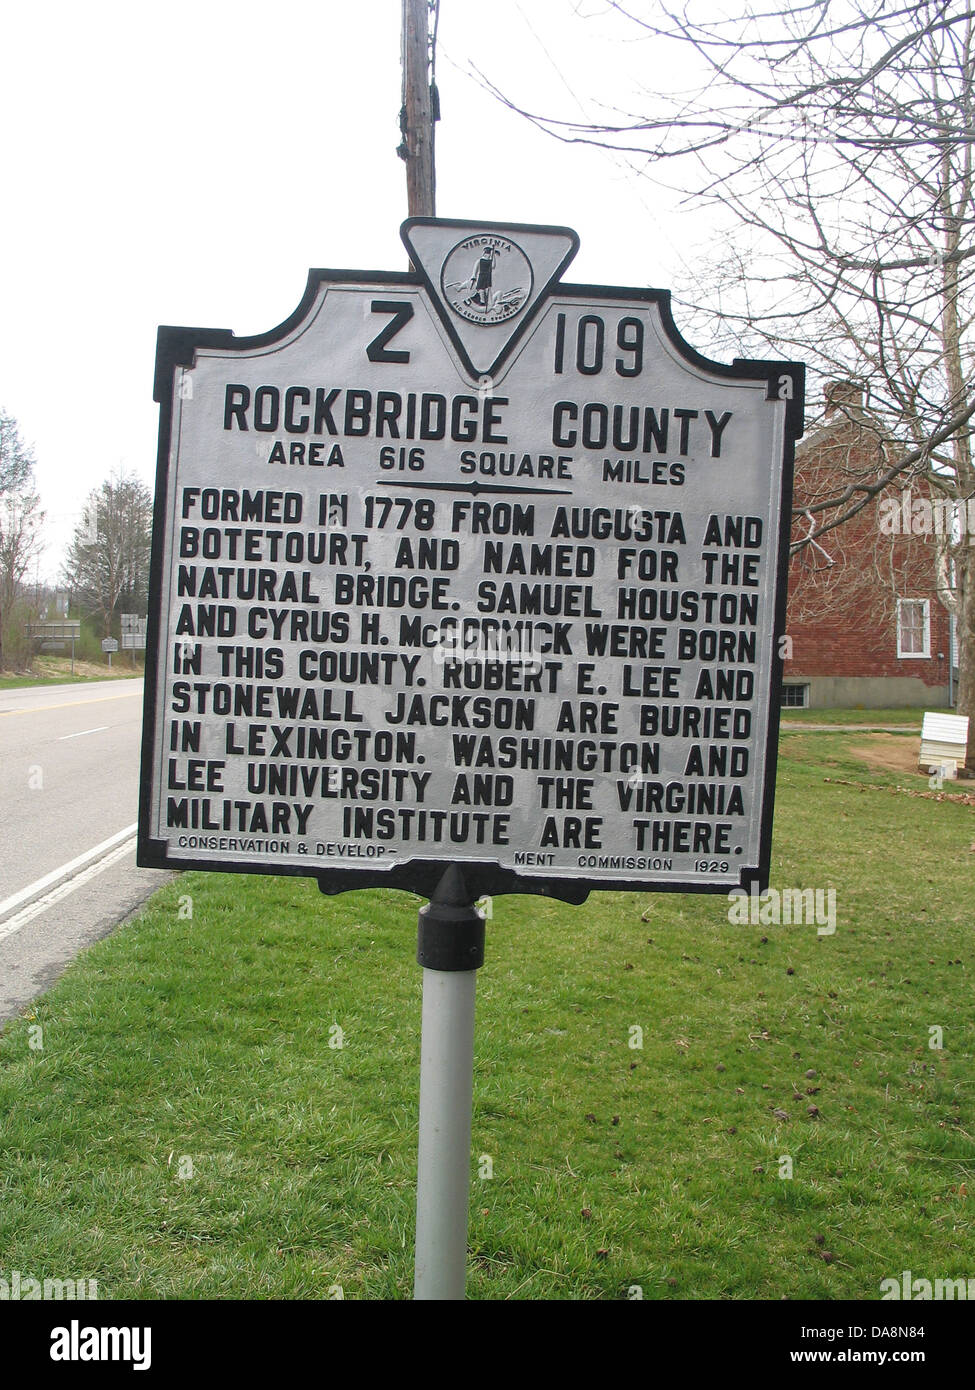 ROCKBRIDGE COUNTY Area 616 Square Miles Formed in 1778 from Augusta and Botetourt, and named for the Natural Bridge. Samuel Houston and Cyrus H. McCormick were born in this county. Robert E. Lee and Stonewall Jackson are buried in Lexington. Washington and Lee University and the Virginia Military Institute are there. Conservation & Development Commission, 1929 Stock Photo